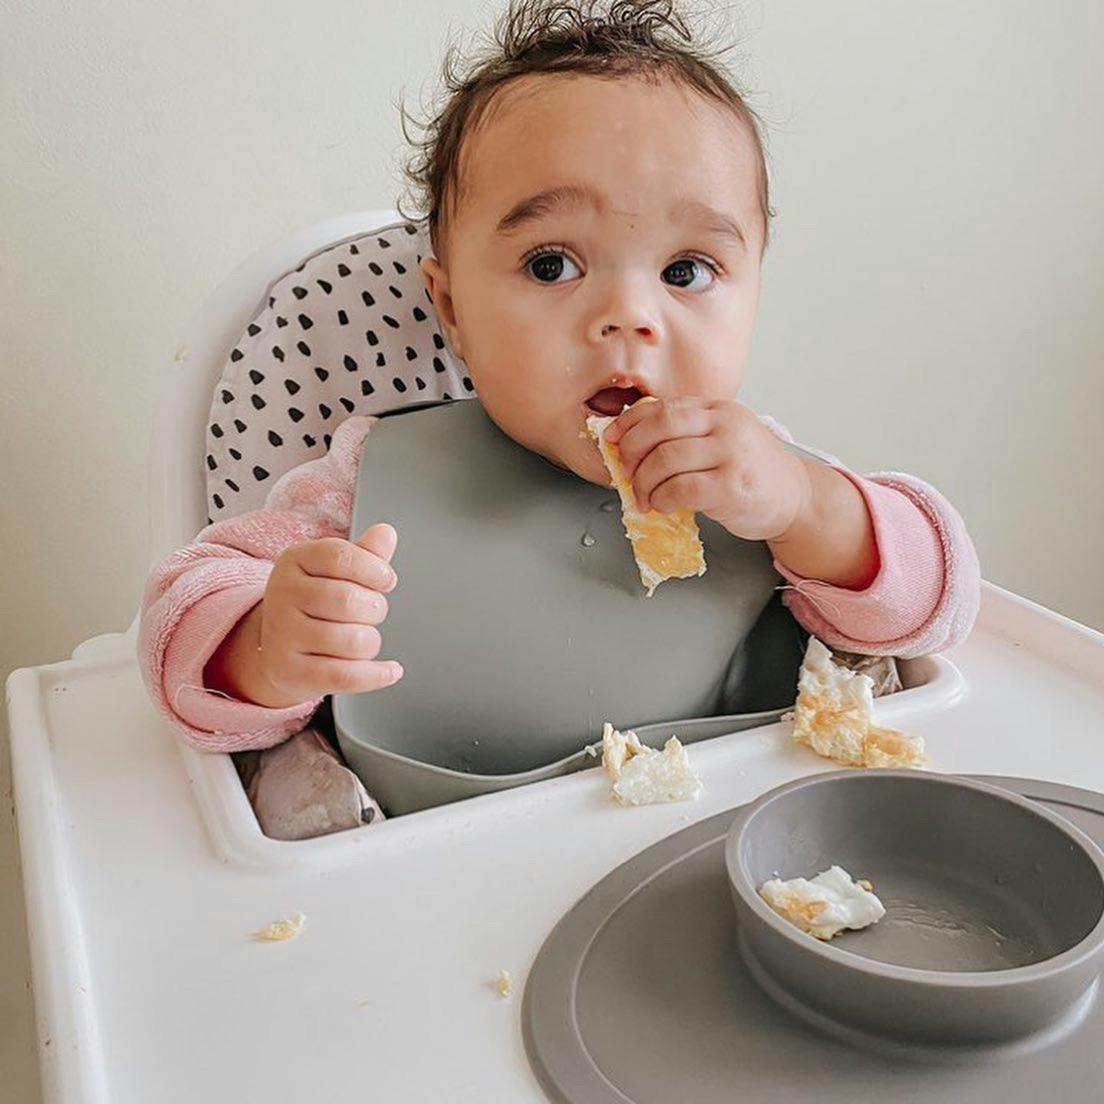 Photograph of a baby in a high chair bringing a trip of fried egg from an ezpz Tiny Bowl to her mouth with her left hand.